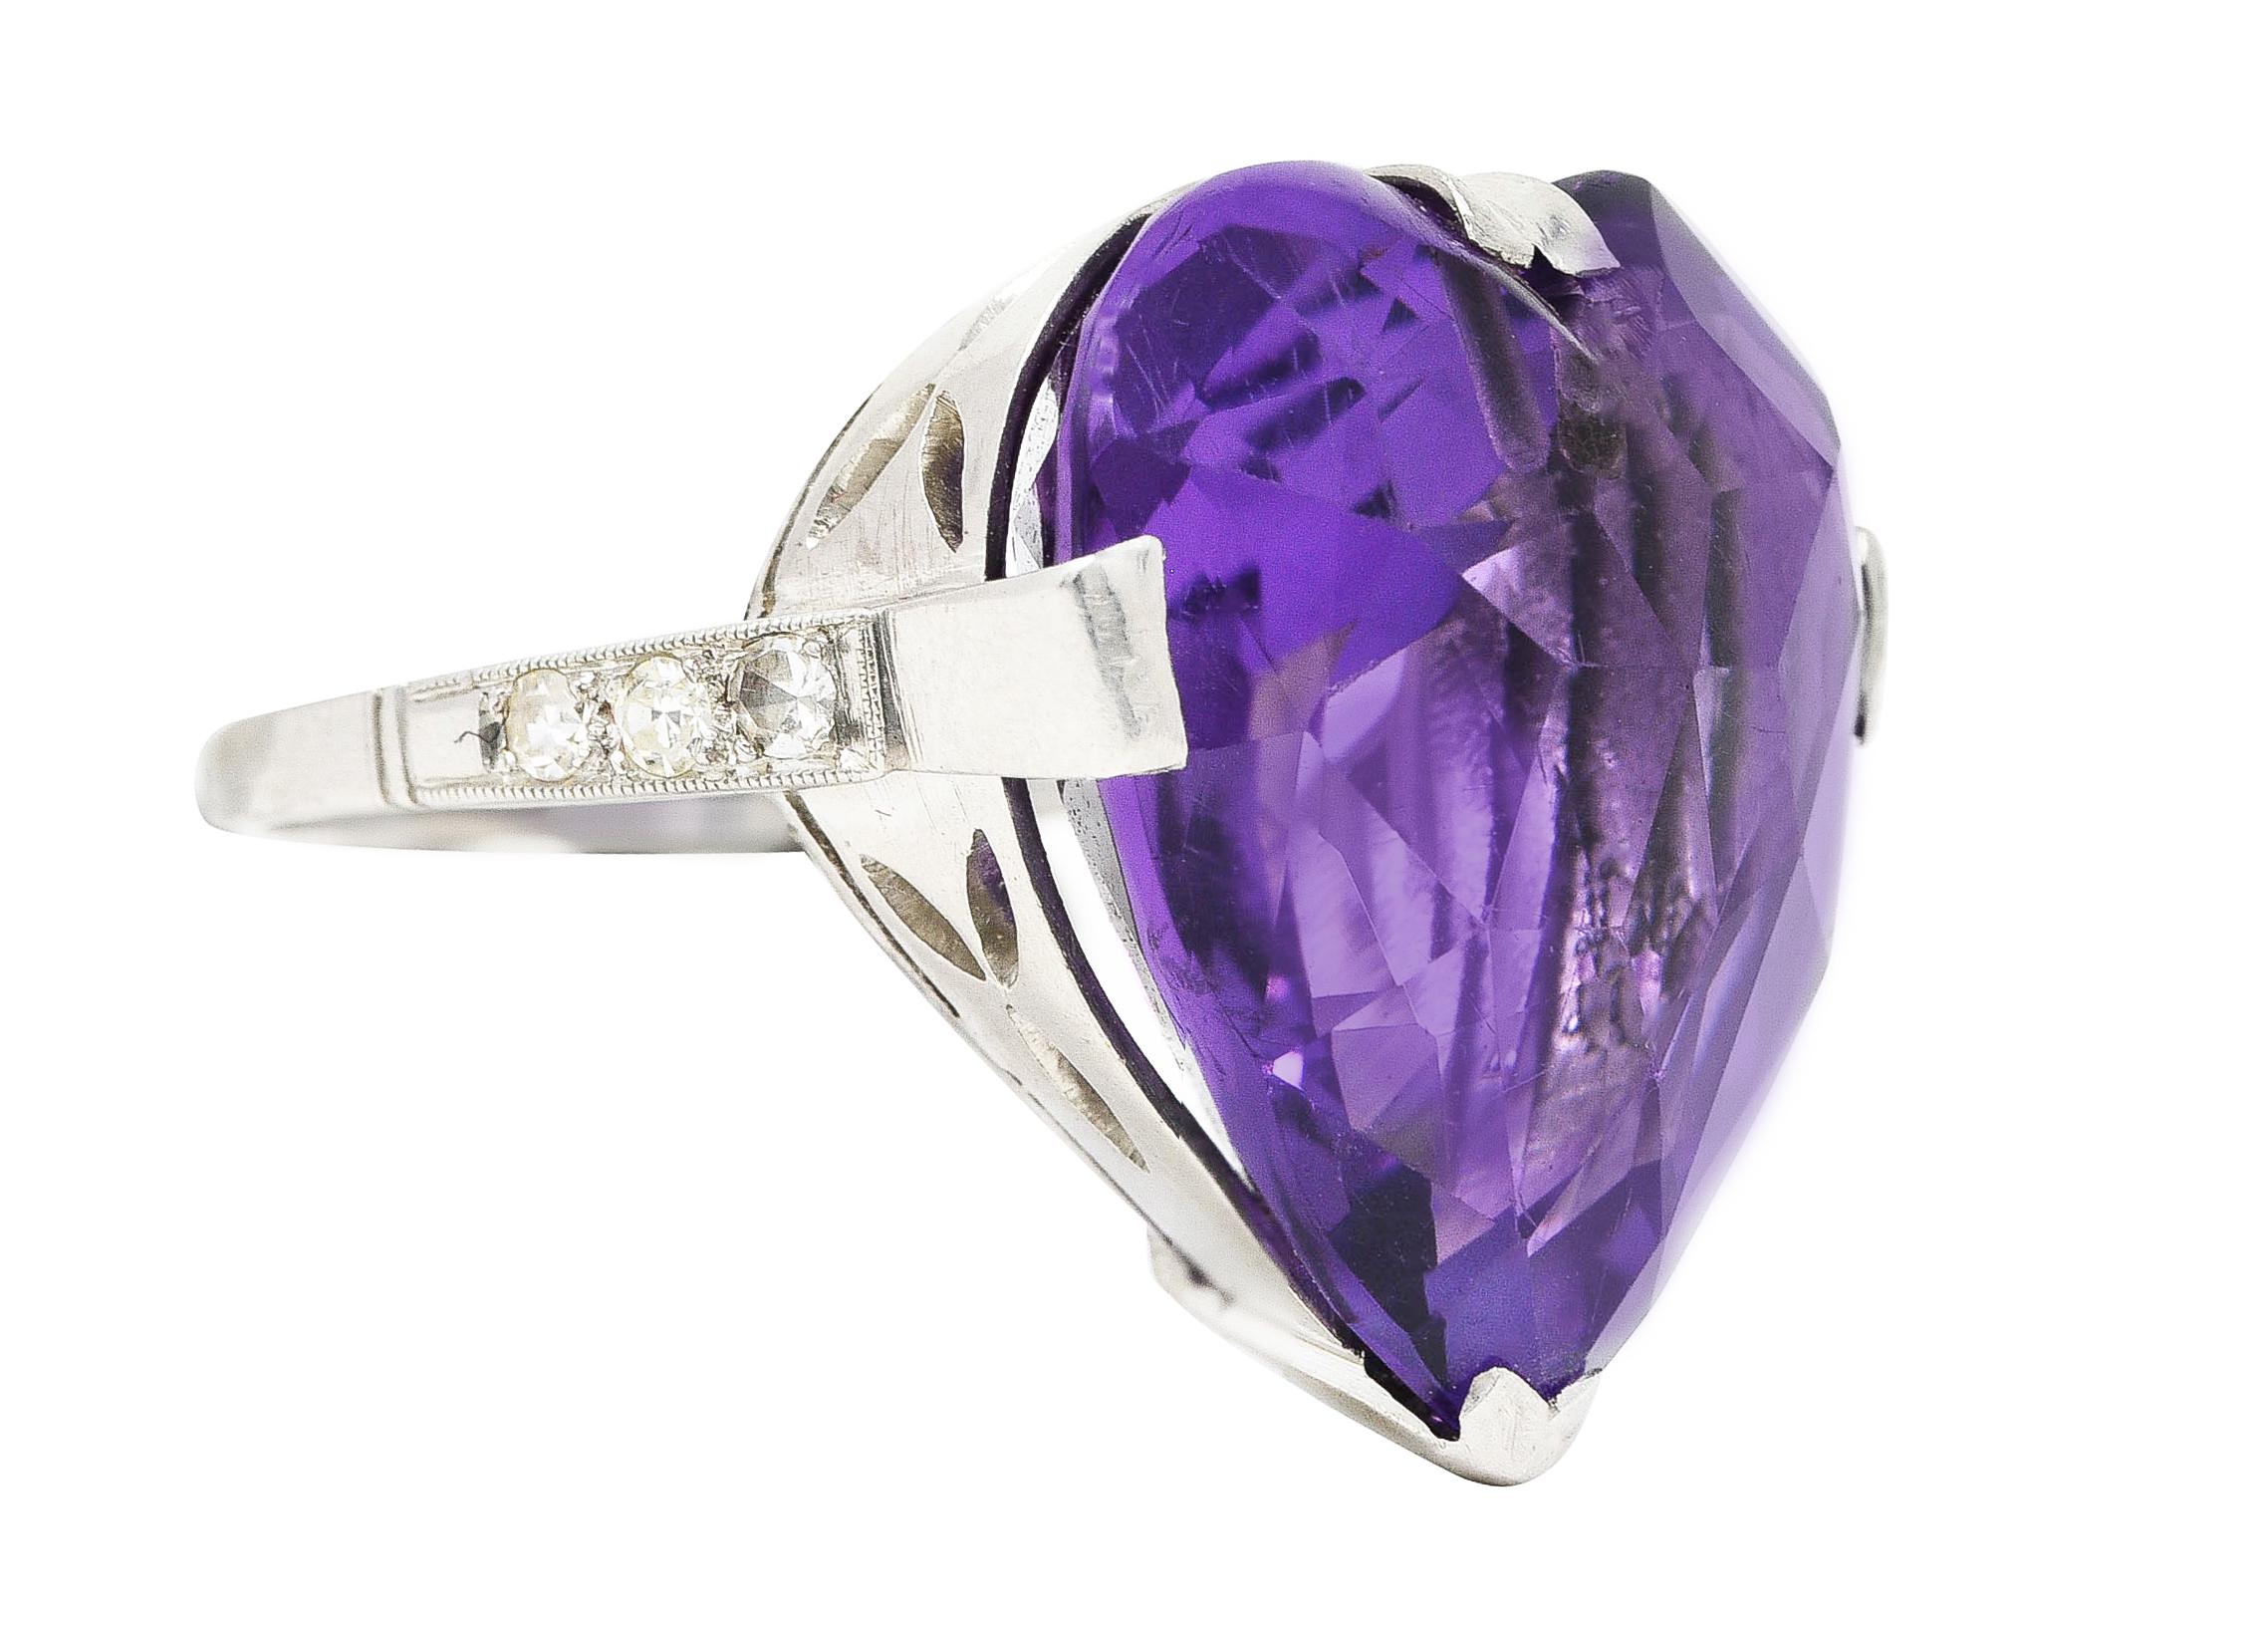 Centering a heart shaped rose cut amethyst measuring 20.0 x 20.0 mm. Transparent reddish-purple in color with medium saturation. Drilled and set with wide prongs in a pierced foliate basket. Flanked by cathedral shoulders bead set with single cut